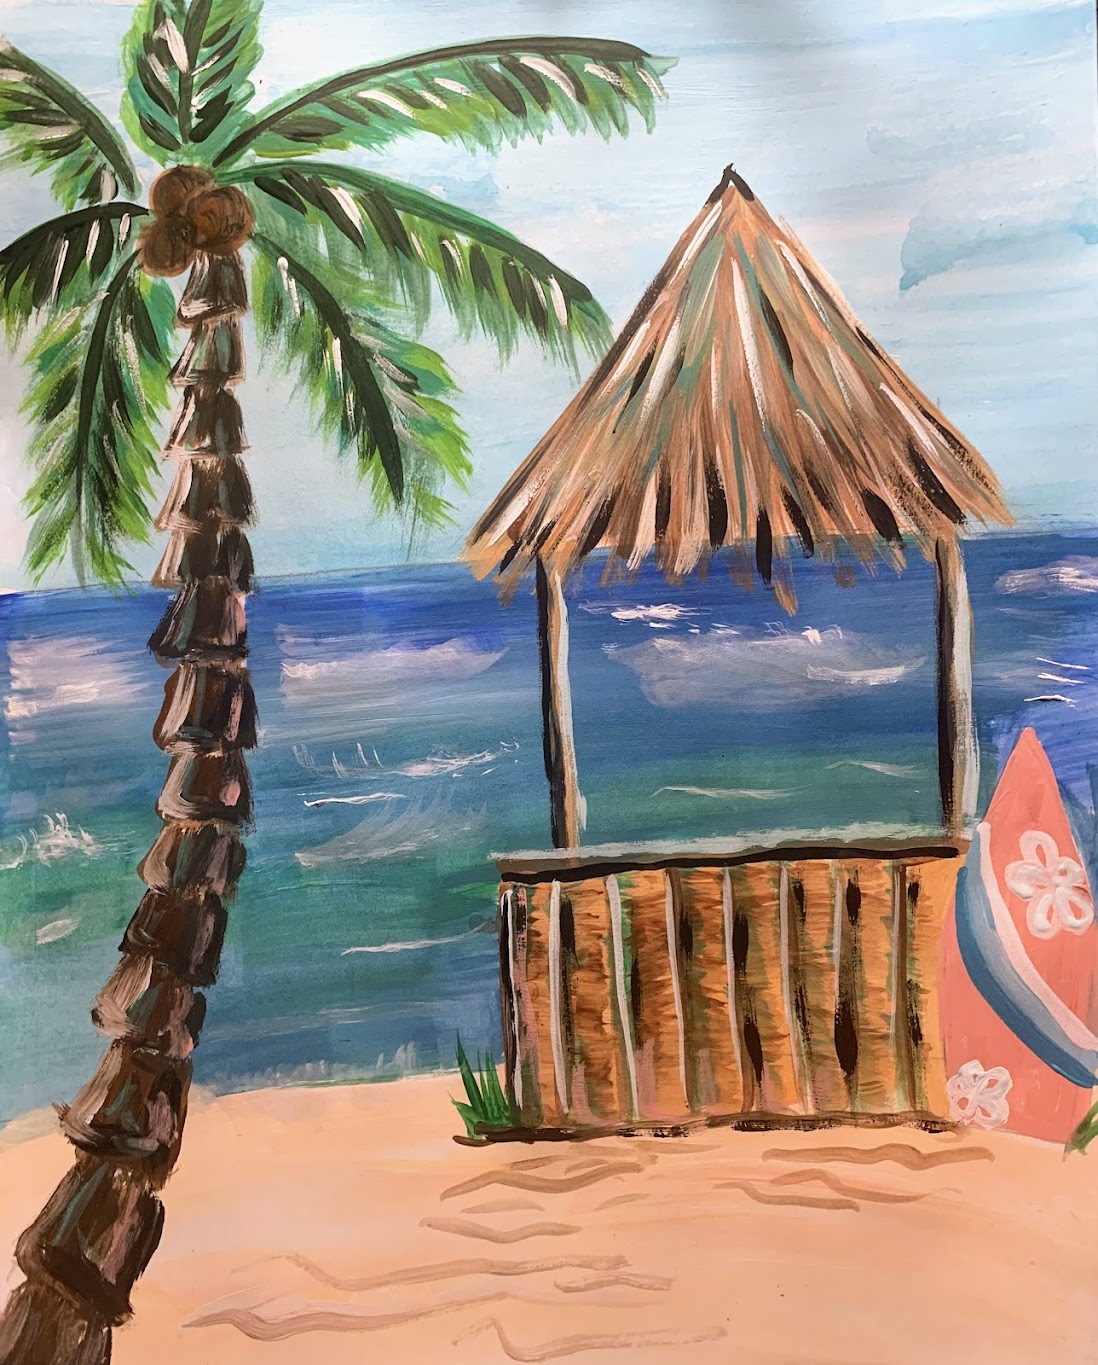 Image of Erica Soto's painting of a Tiki Hut